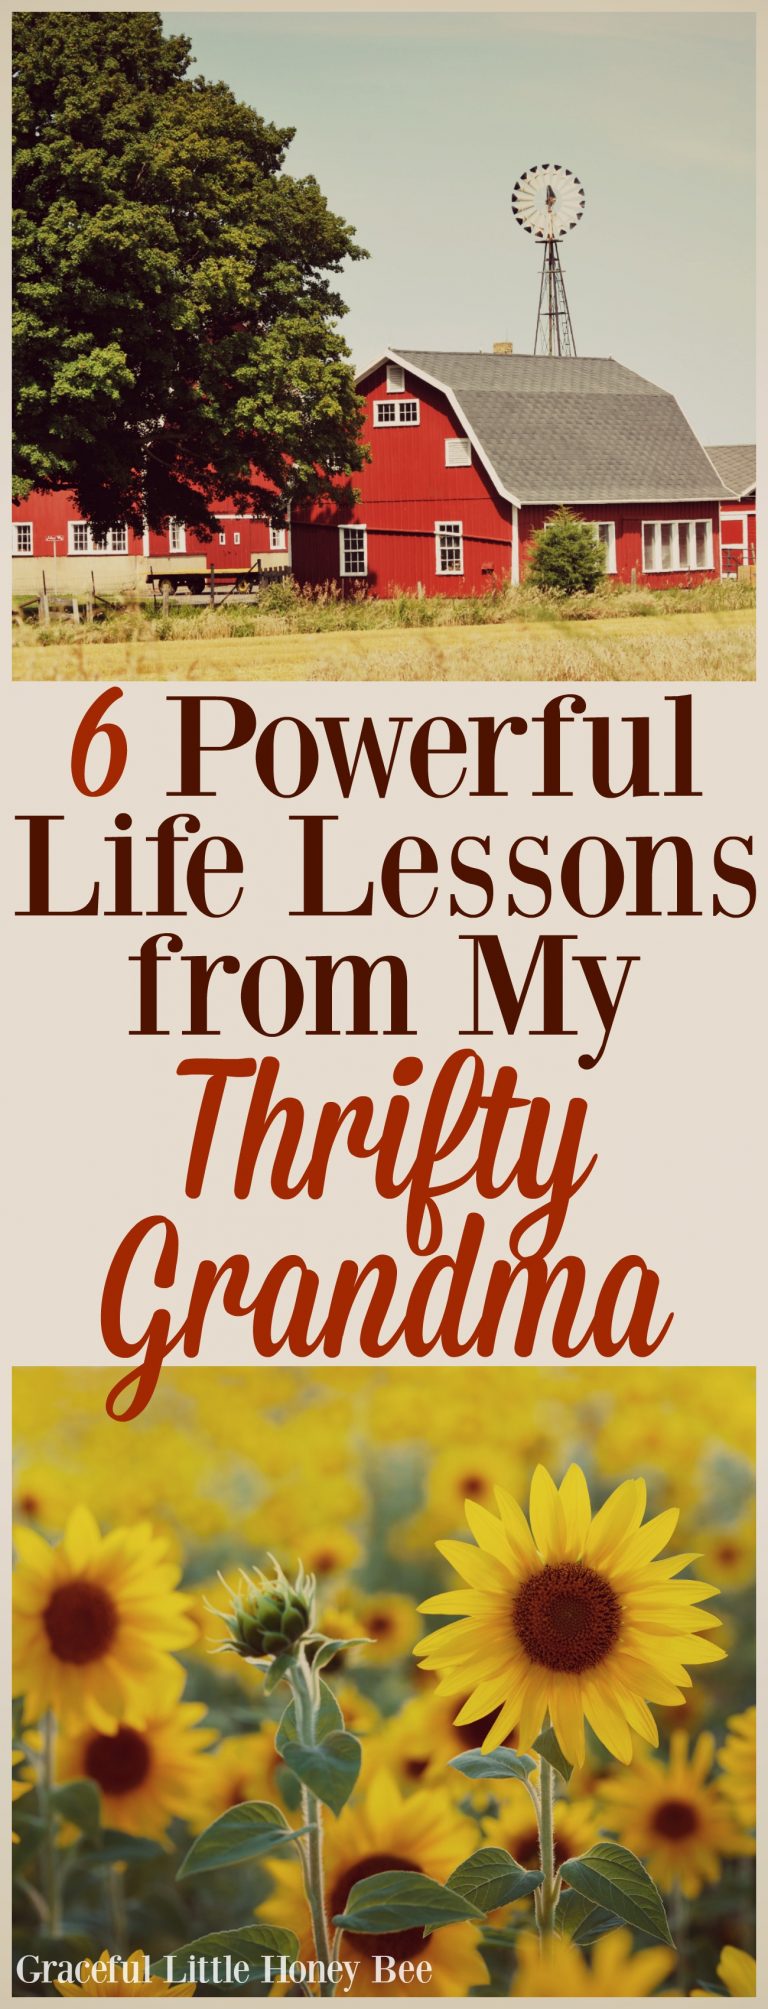 6 Powerful Life Lessons Learned from my Thrifty Grandma